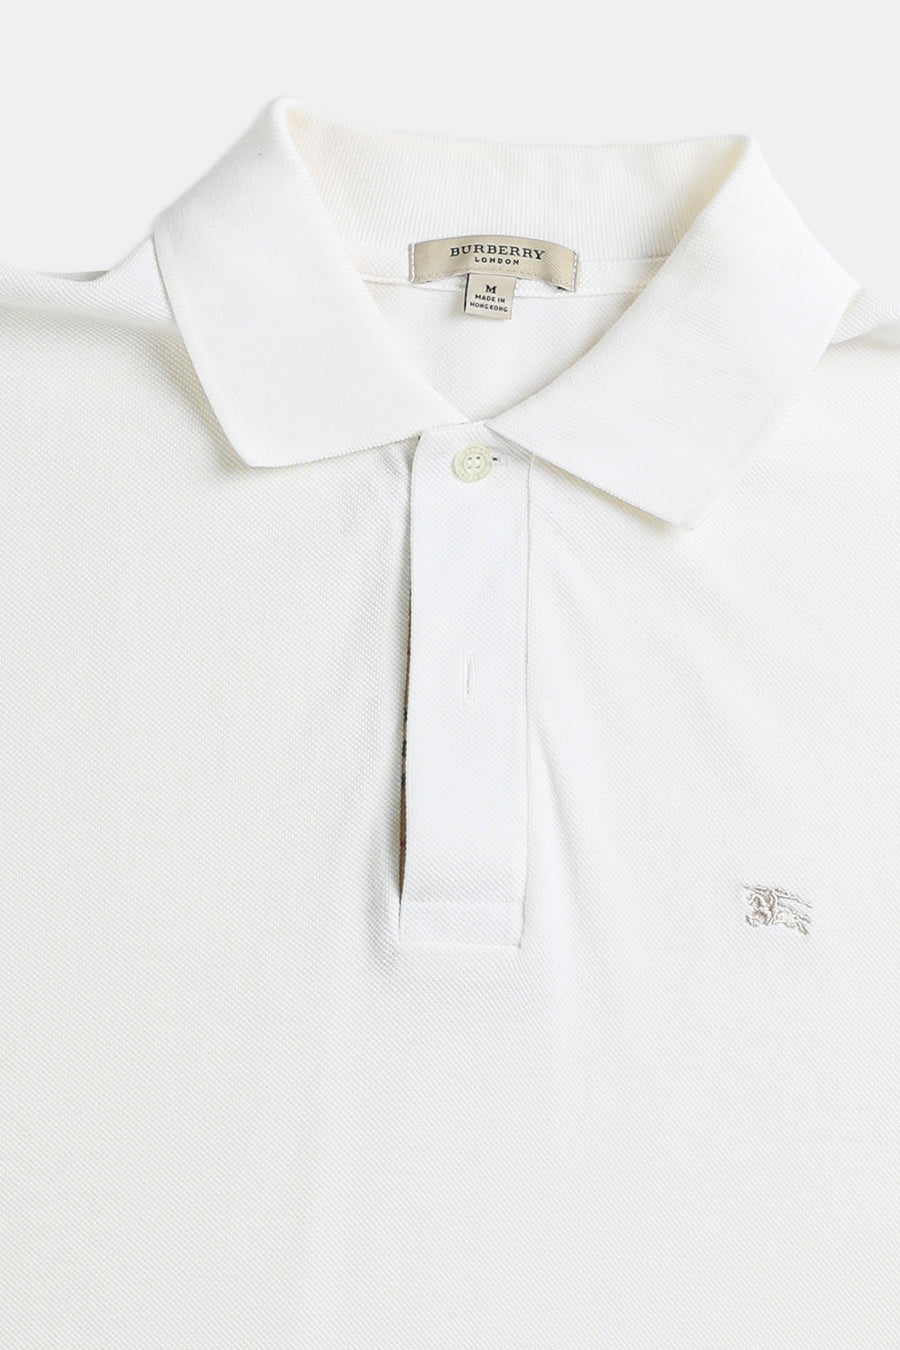 Vintage Burberry Collared Tee - L